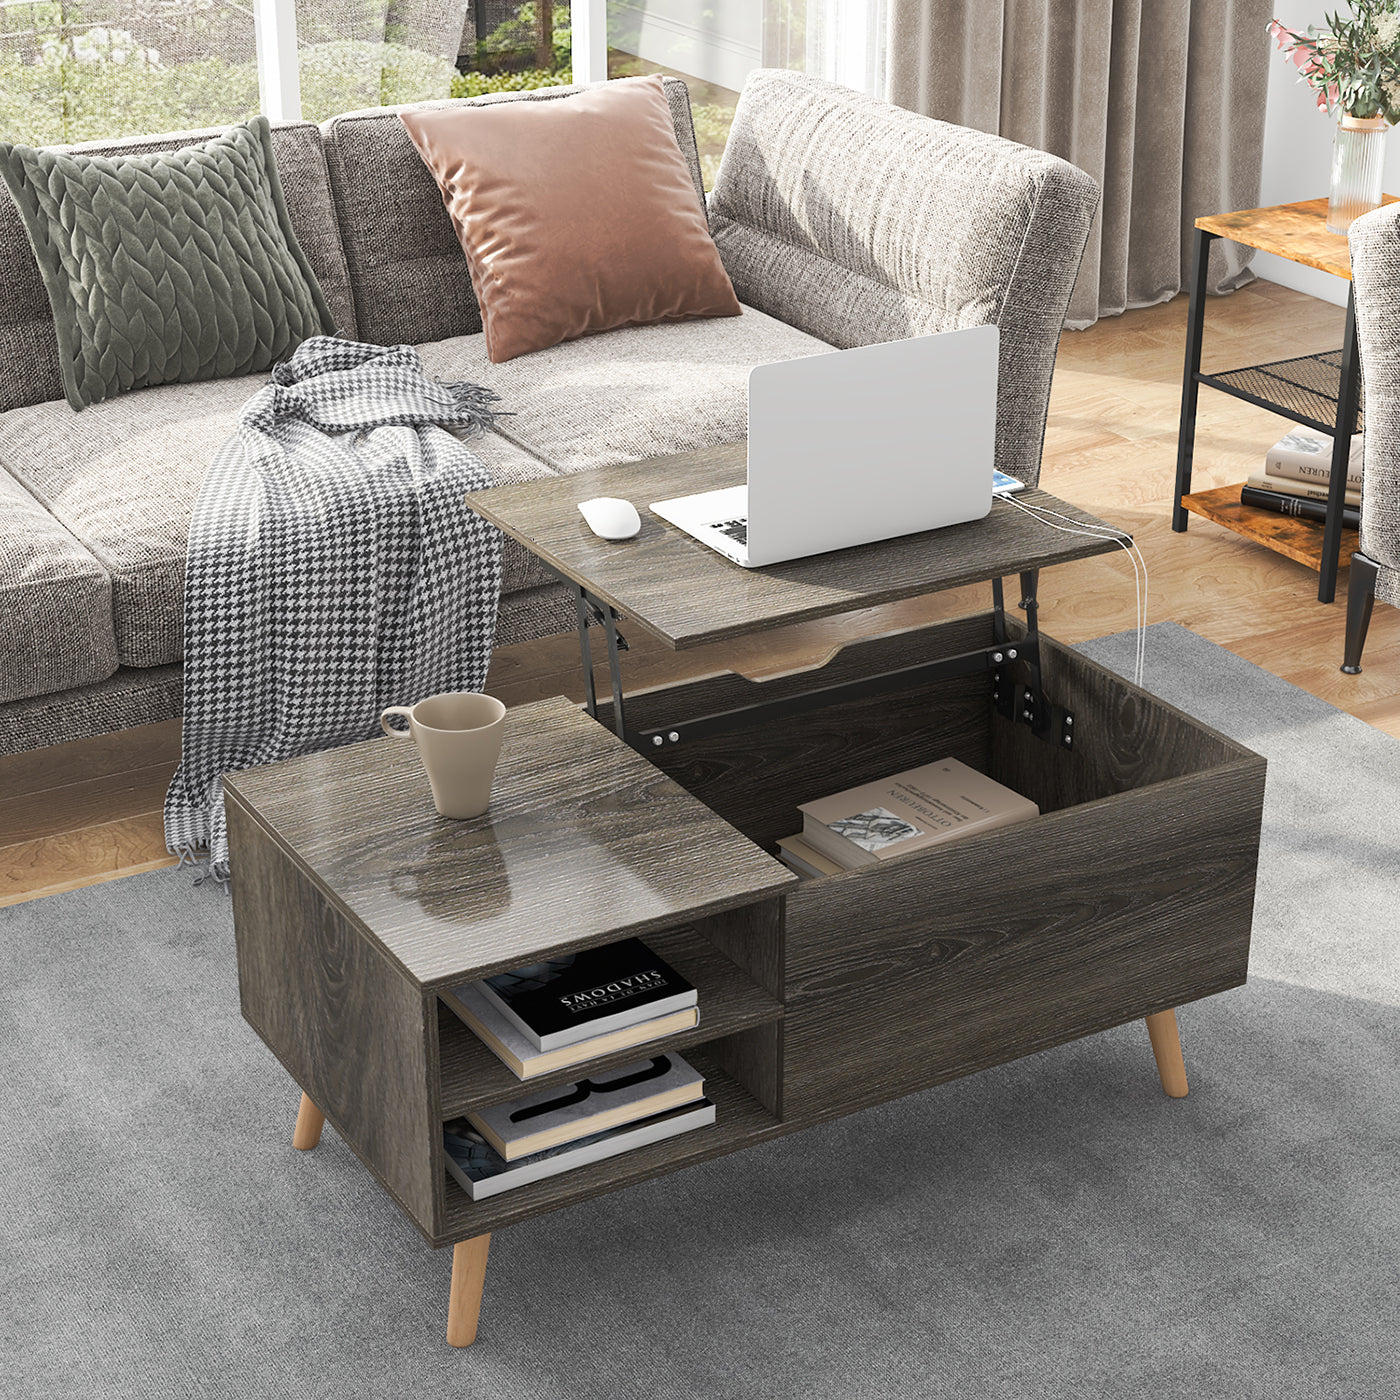 Hommpa Lift Top Coffee Table with Hidden Storage and Side Drawer Charging Station for Home Living Room